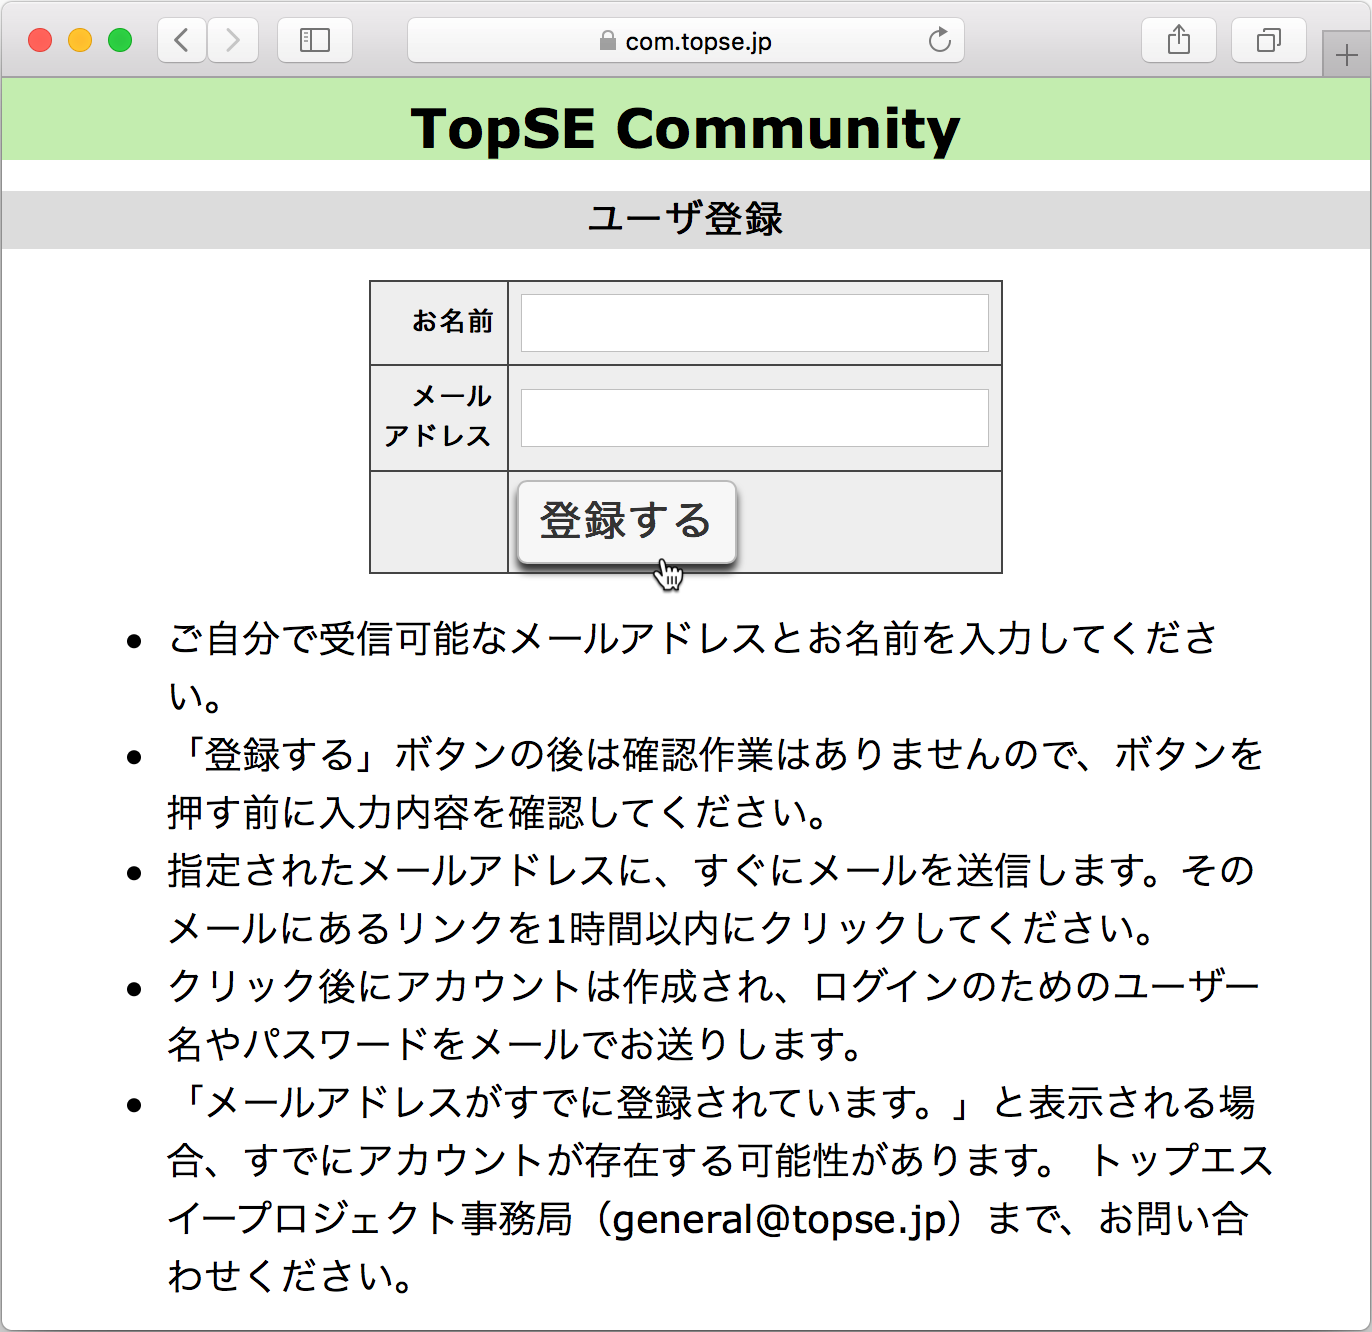 TopSE Community Page